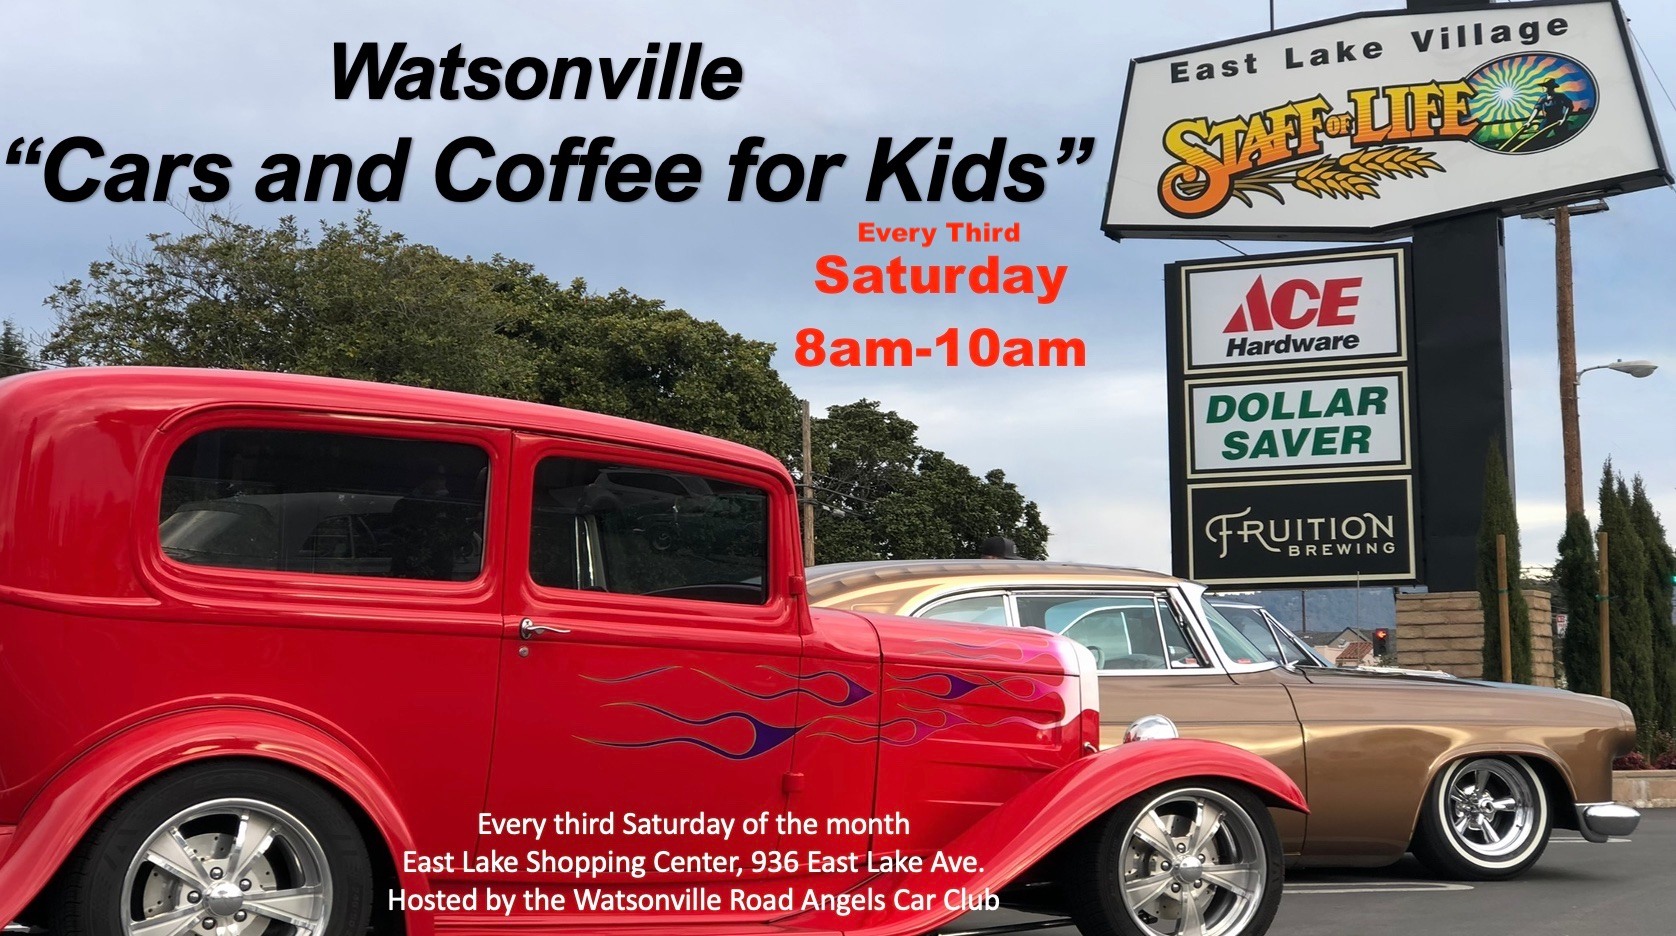 Watsonville Cars and Coffee for Kids